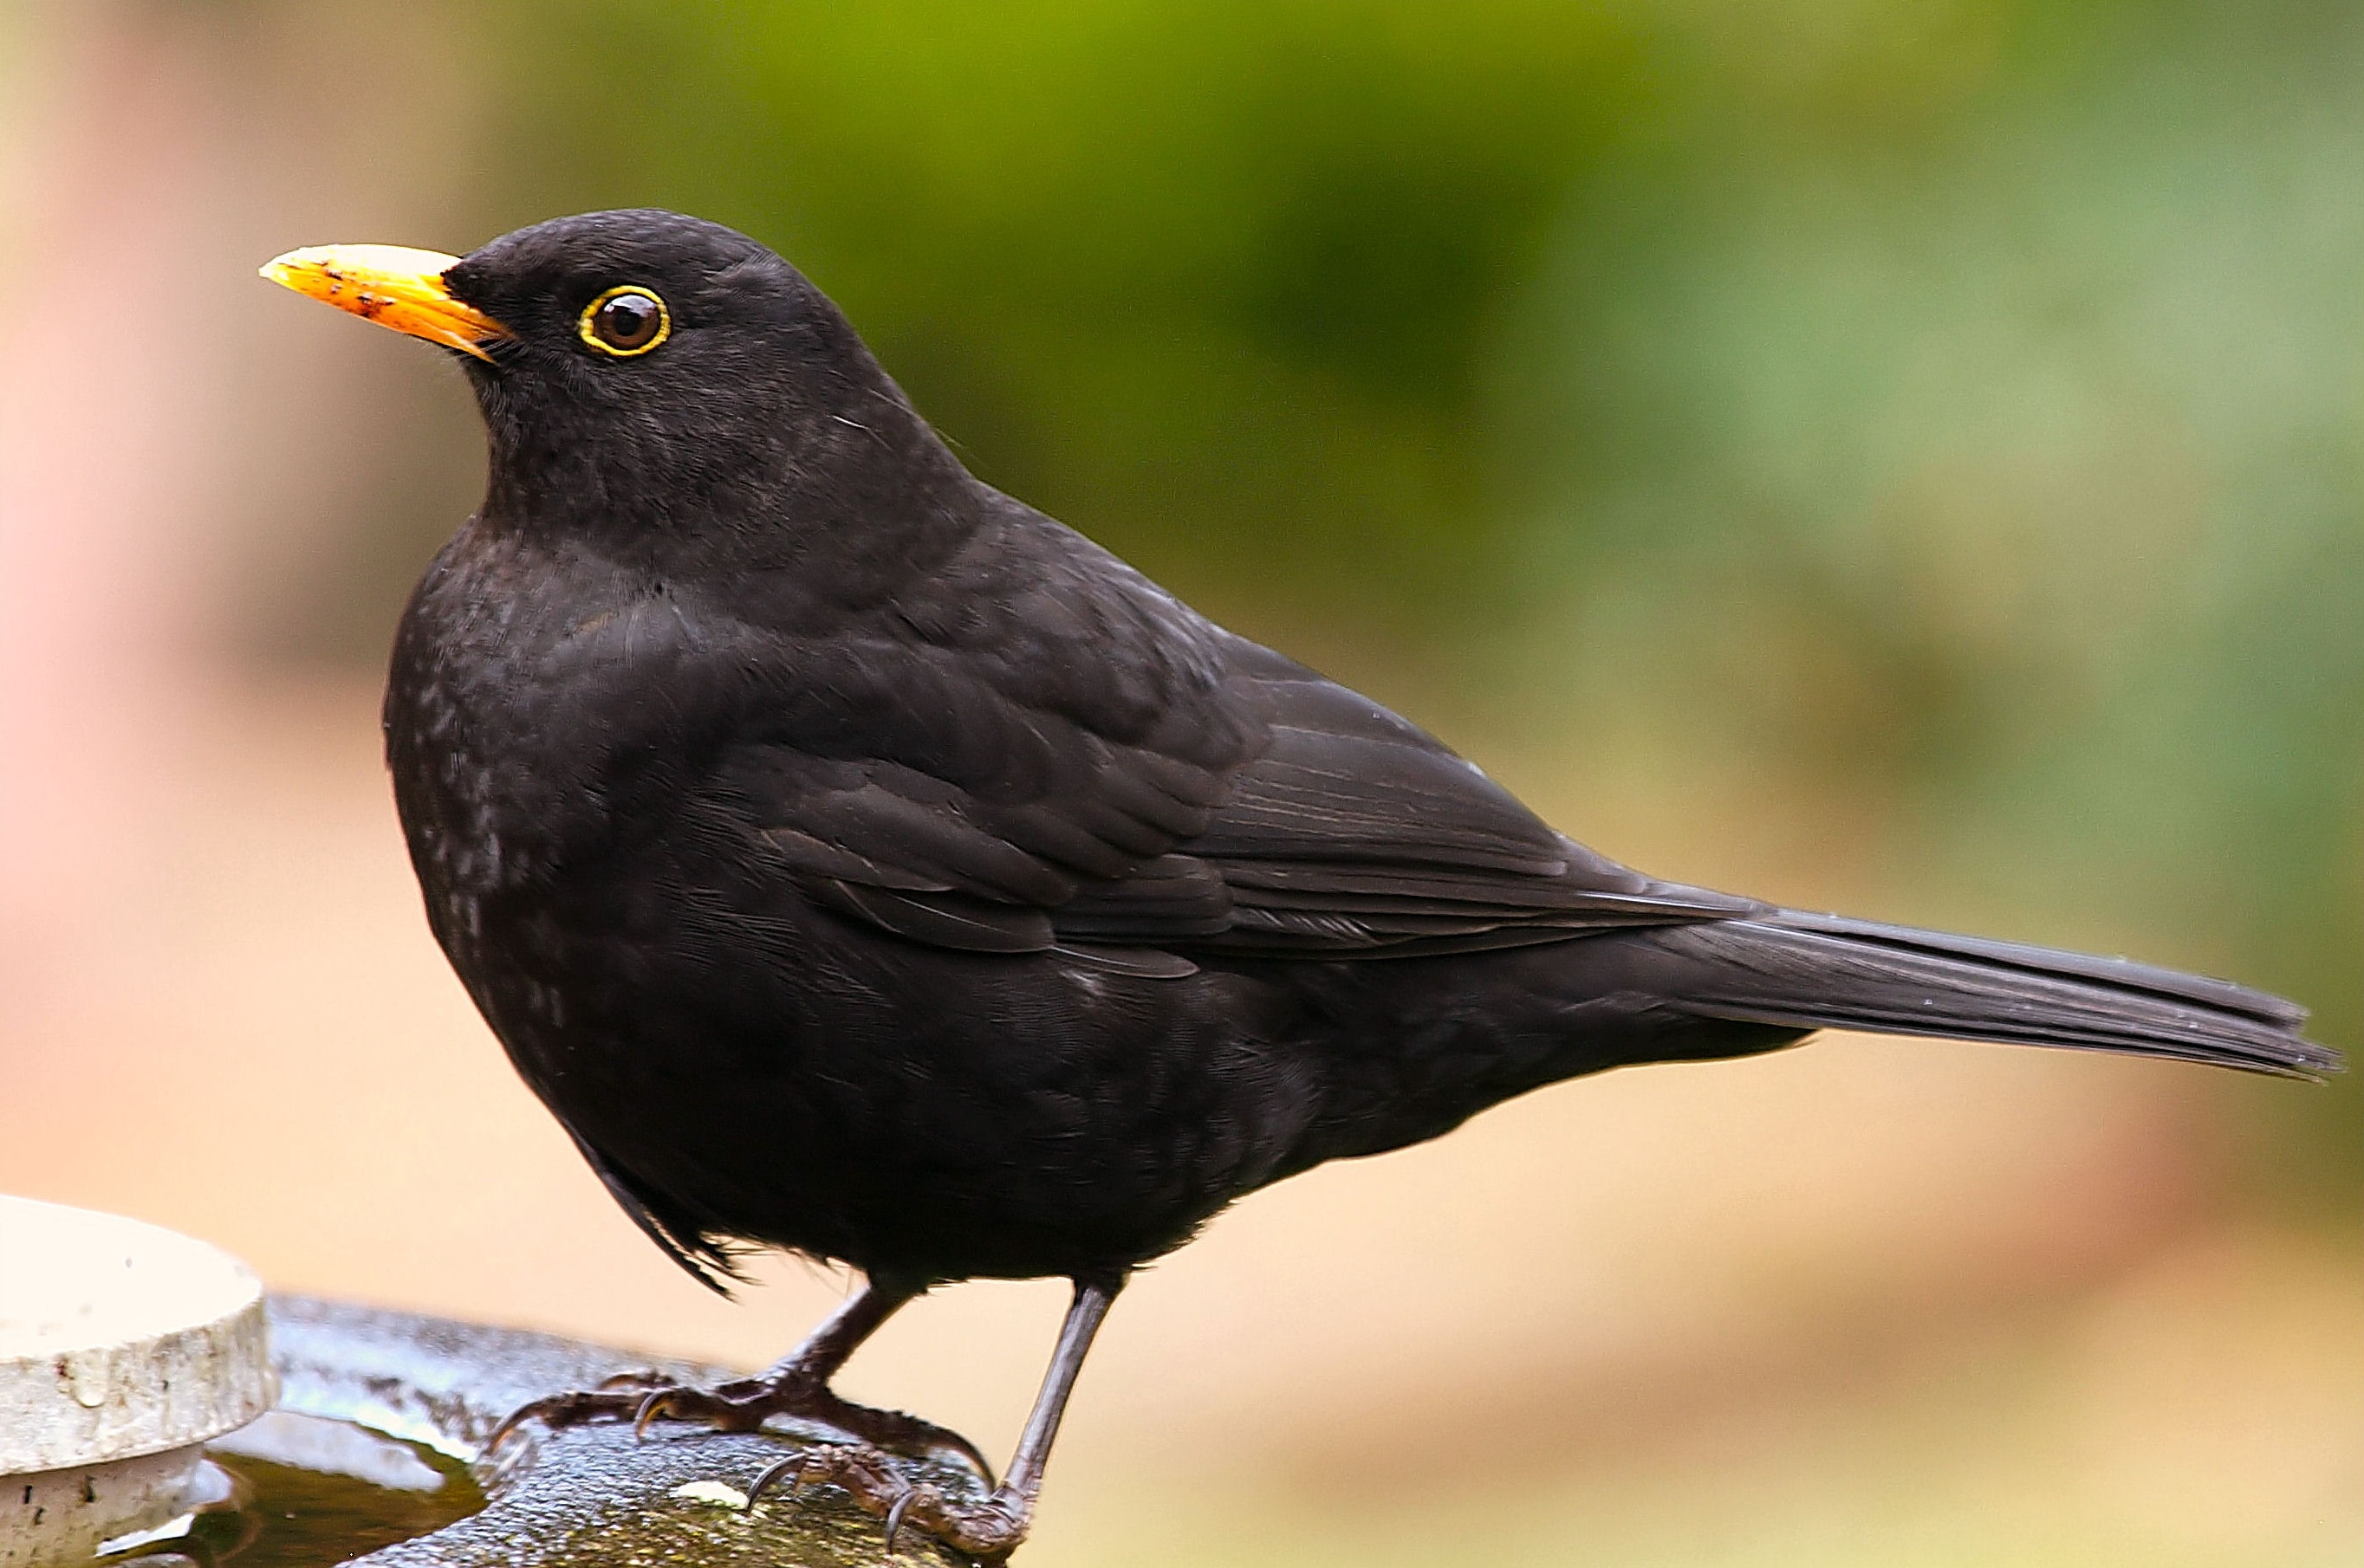 Common Blackbird, HQ wallpapers, High-quality pictures, 4K resolution, 2730x1810 HD Desktop